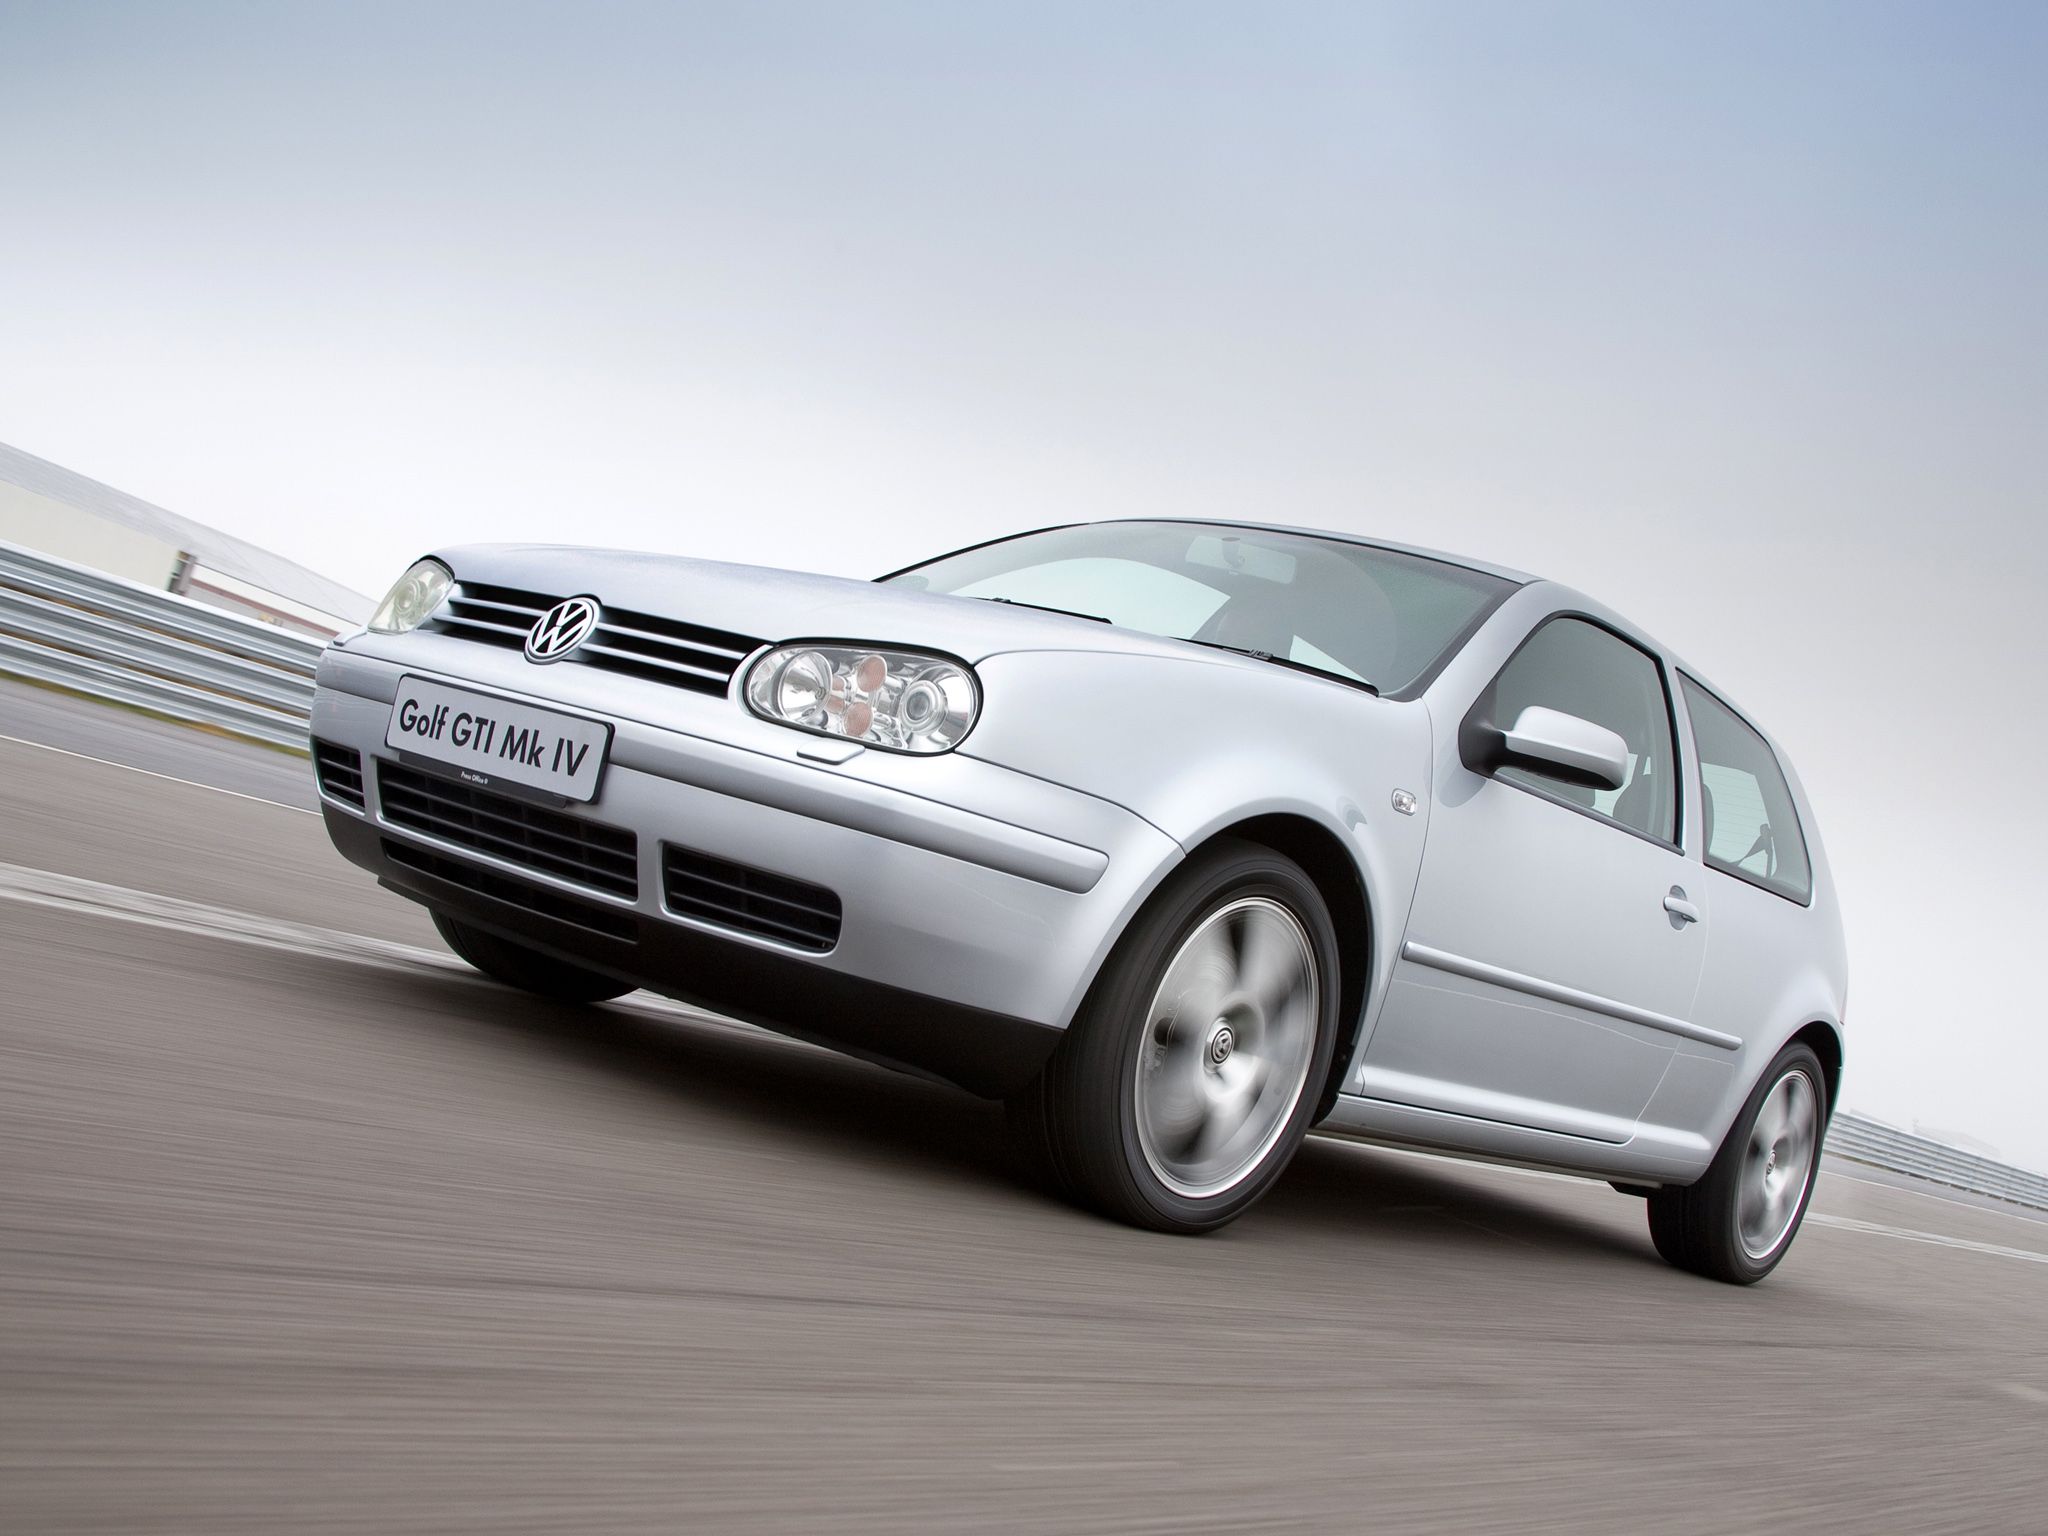 Volkswagen Golf MK4 - Everything You Need to Know About One of the Best,  Most Boring Cars Ever Made